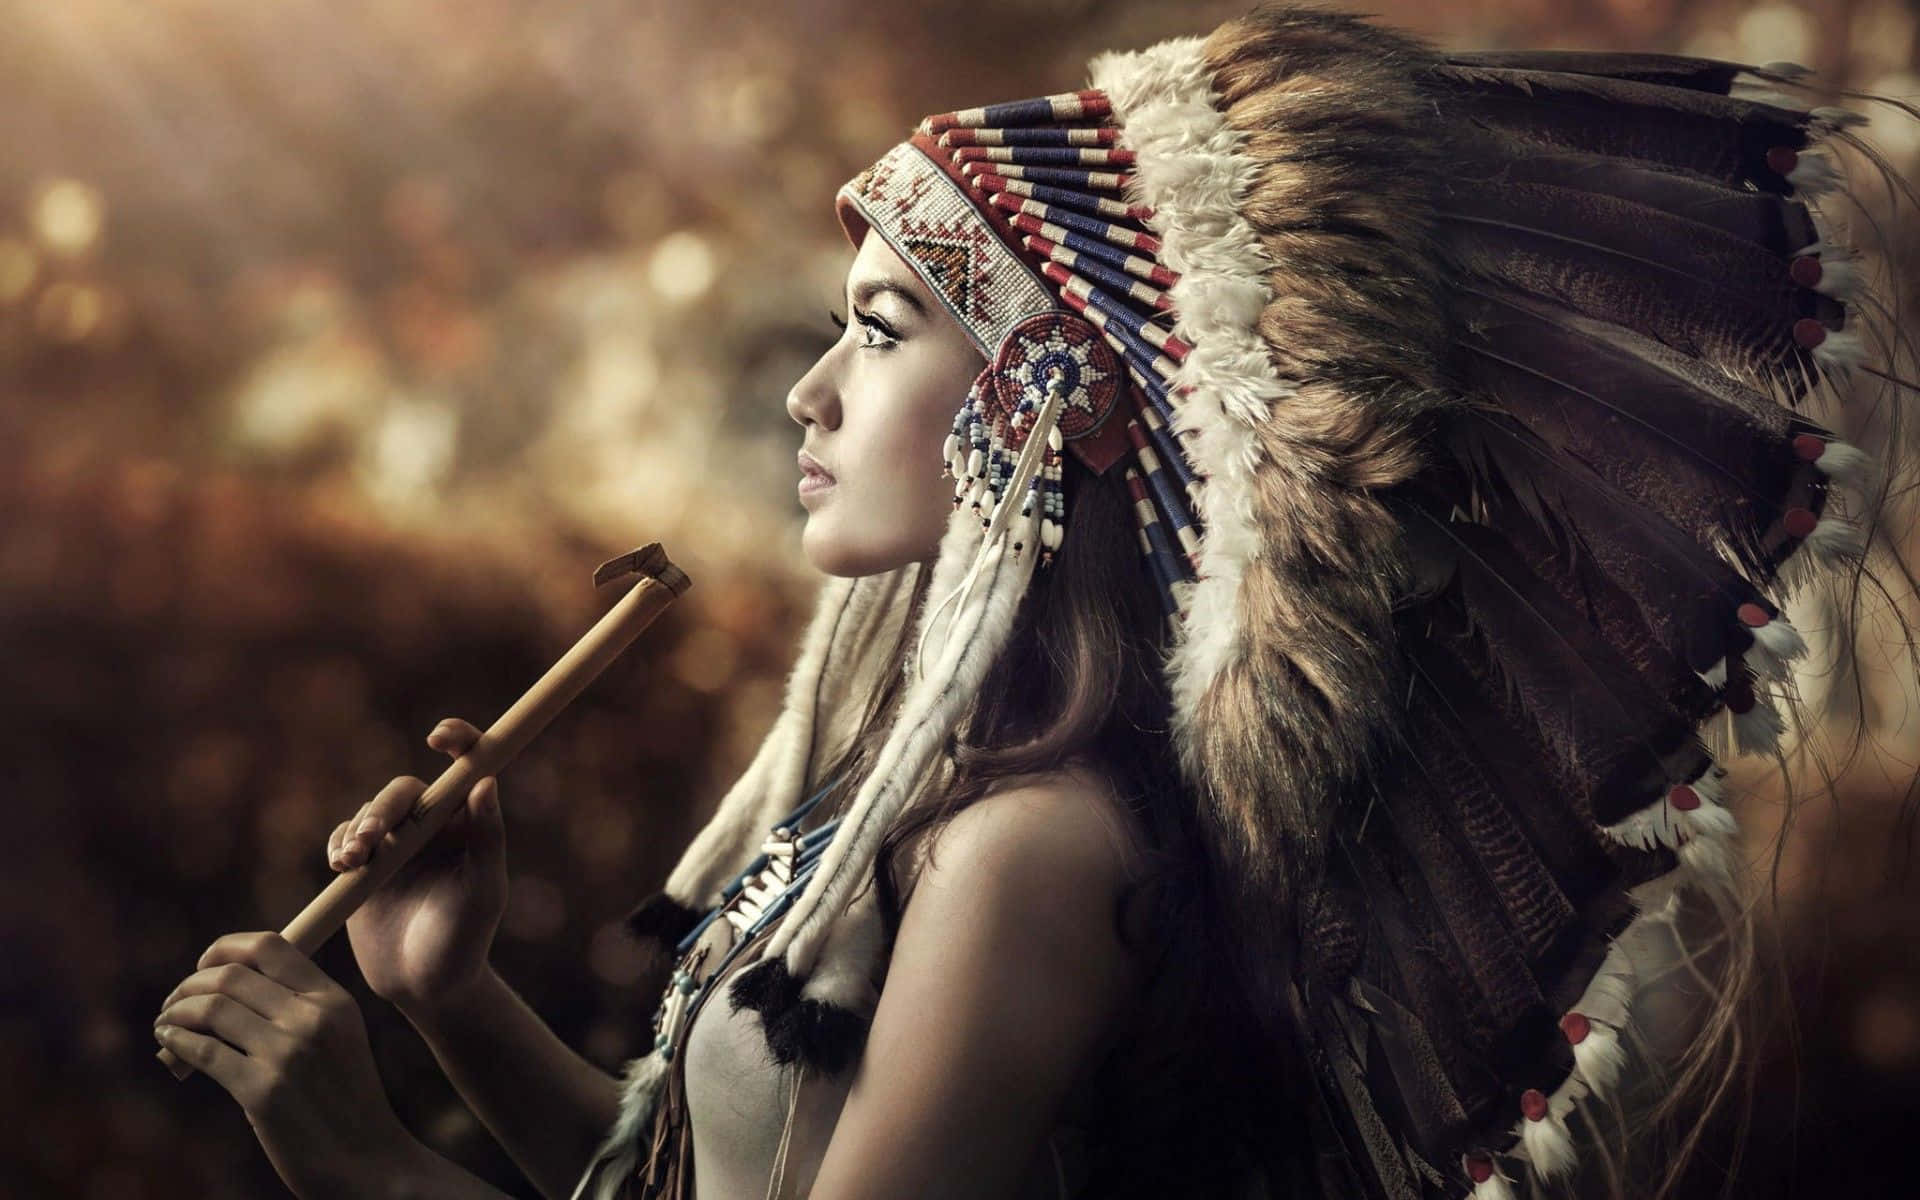 American Indian Apache Warrior Chief Traditional Stock Photo 1289621980   Shutterstock